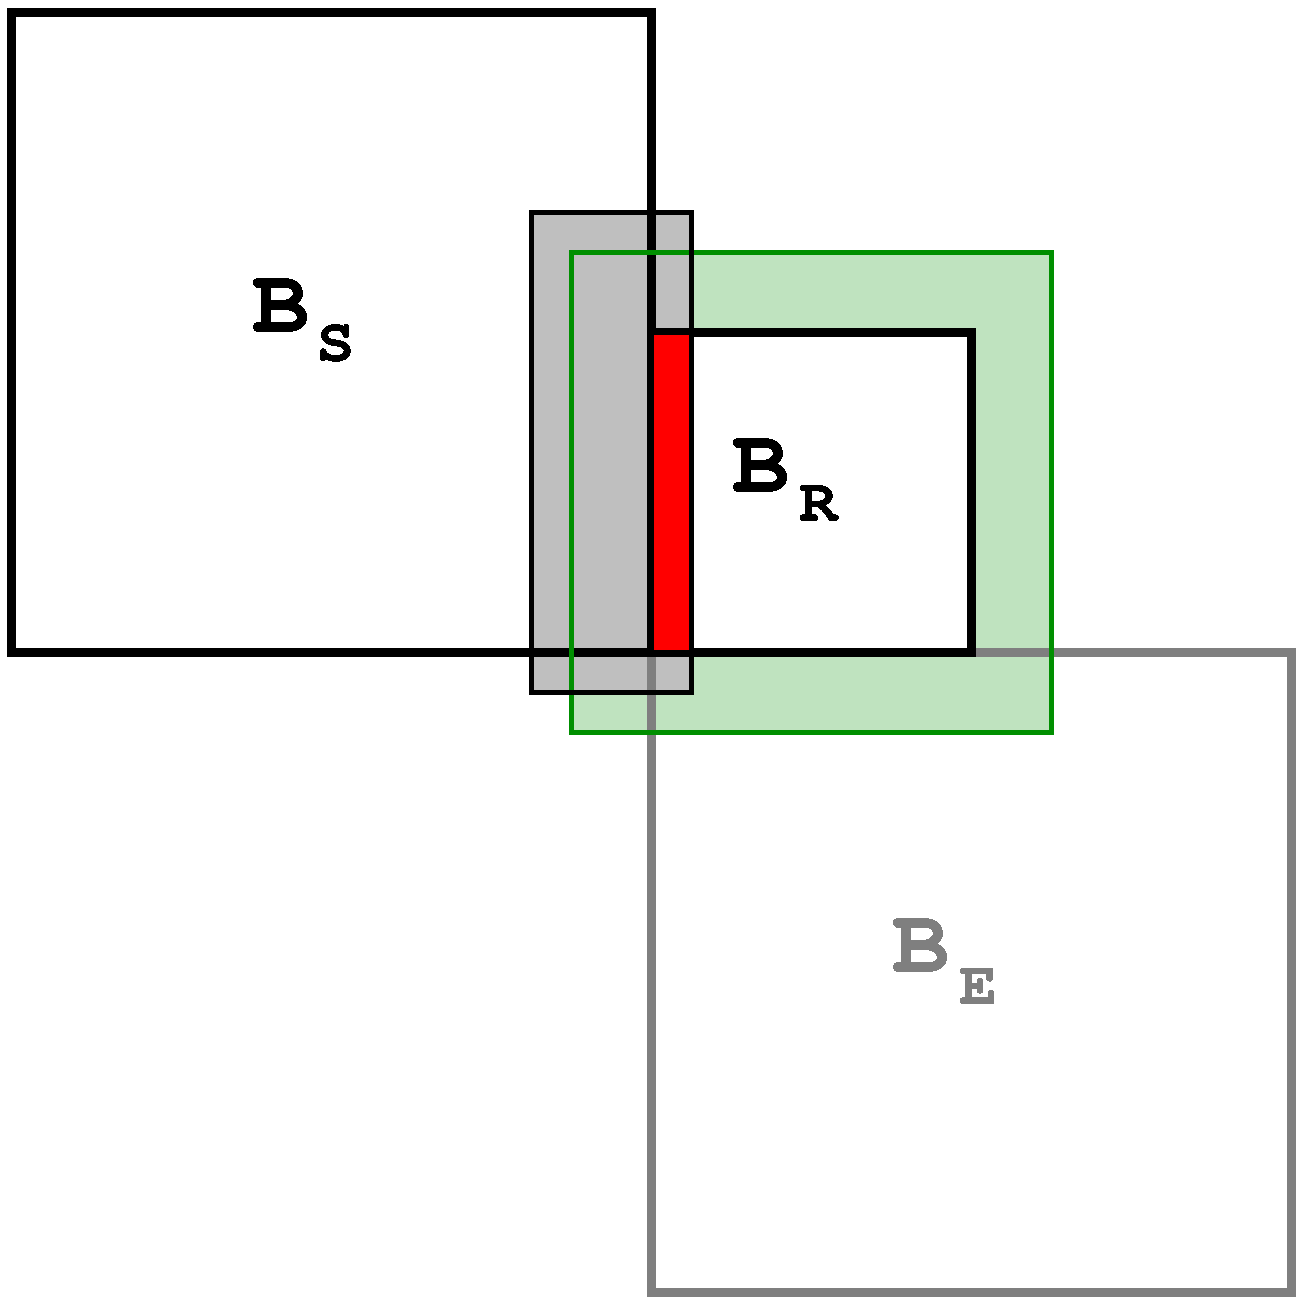 image illustrating the inter-relationship between sending (coarse) block Bs, receiving (fine) block Br, and extra blocks Be.